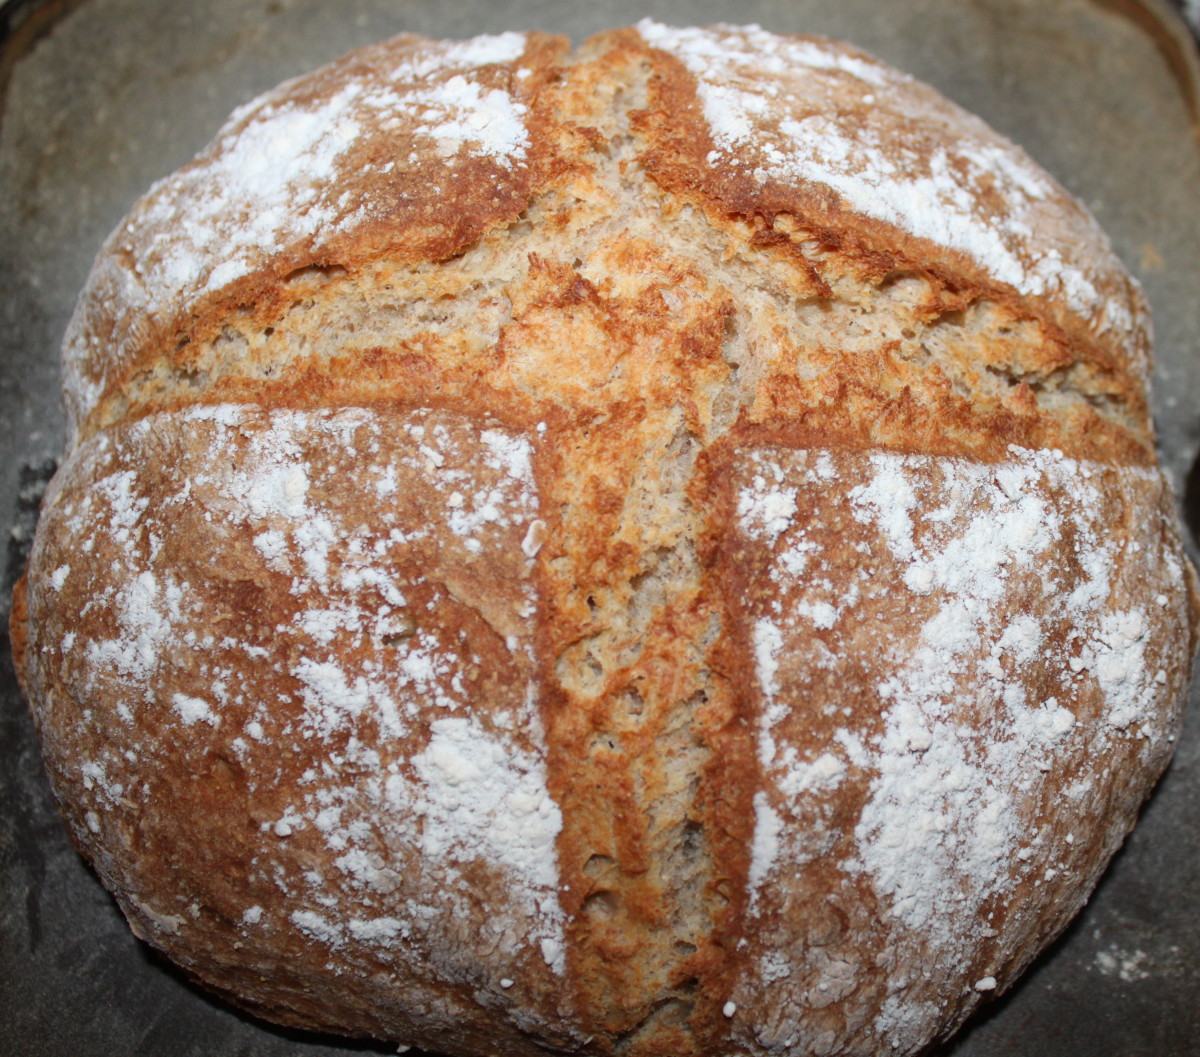 Step five: Enjoy! Now this is a perfect-looking loaf!